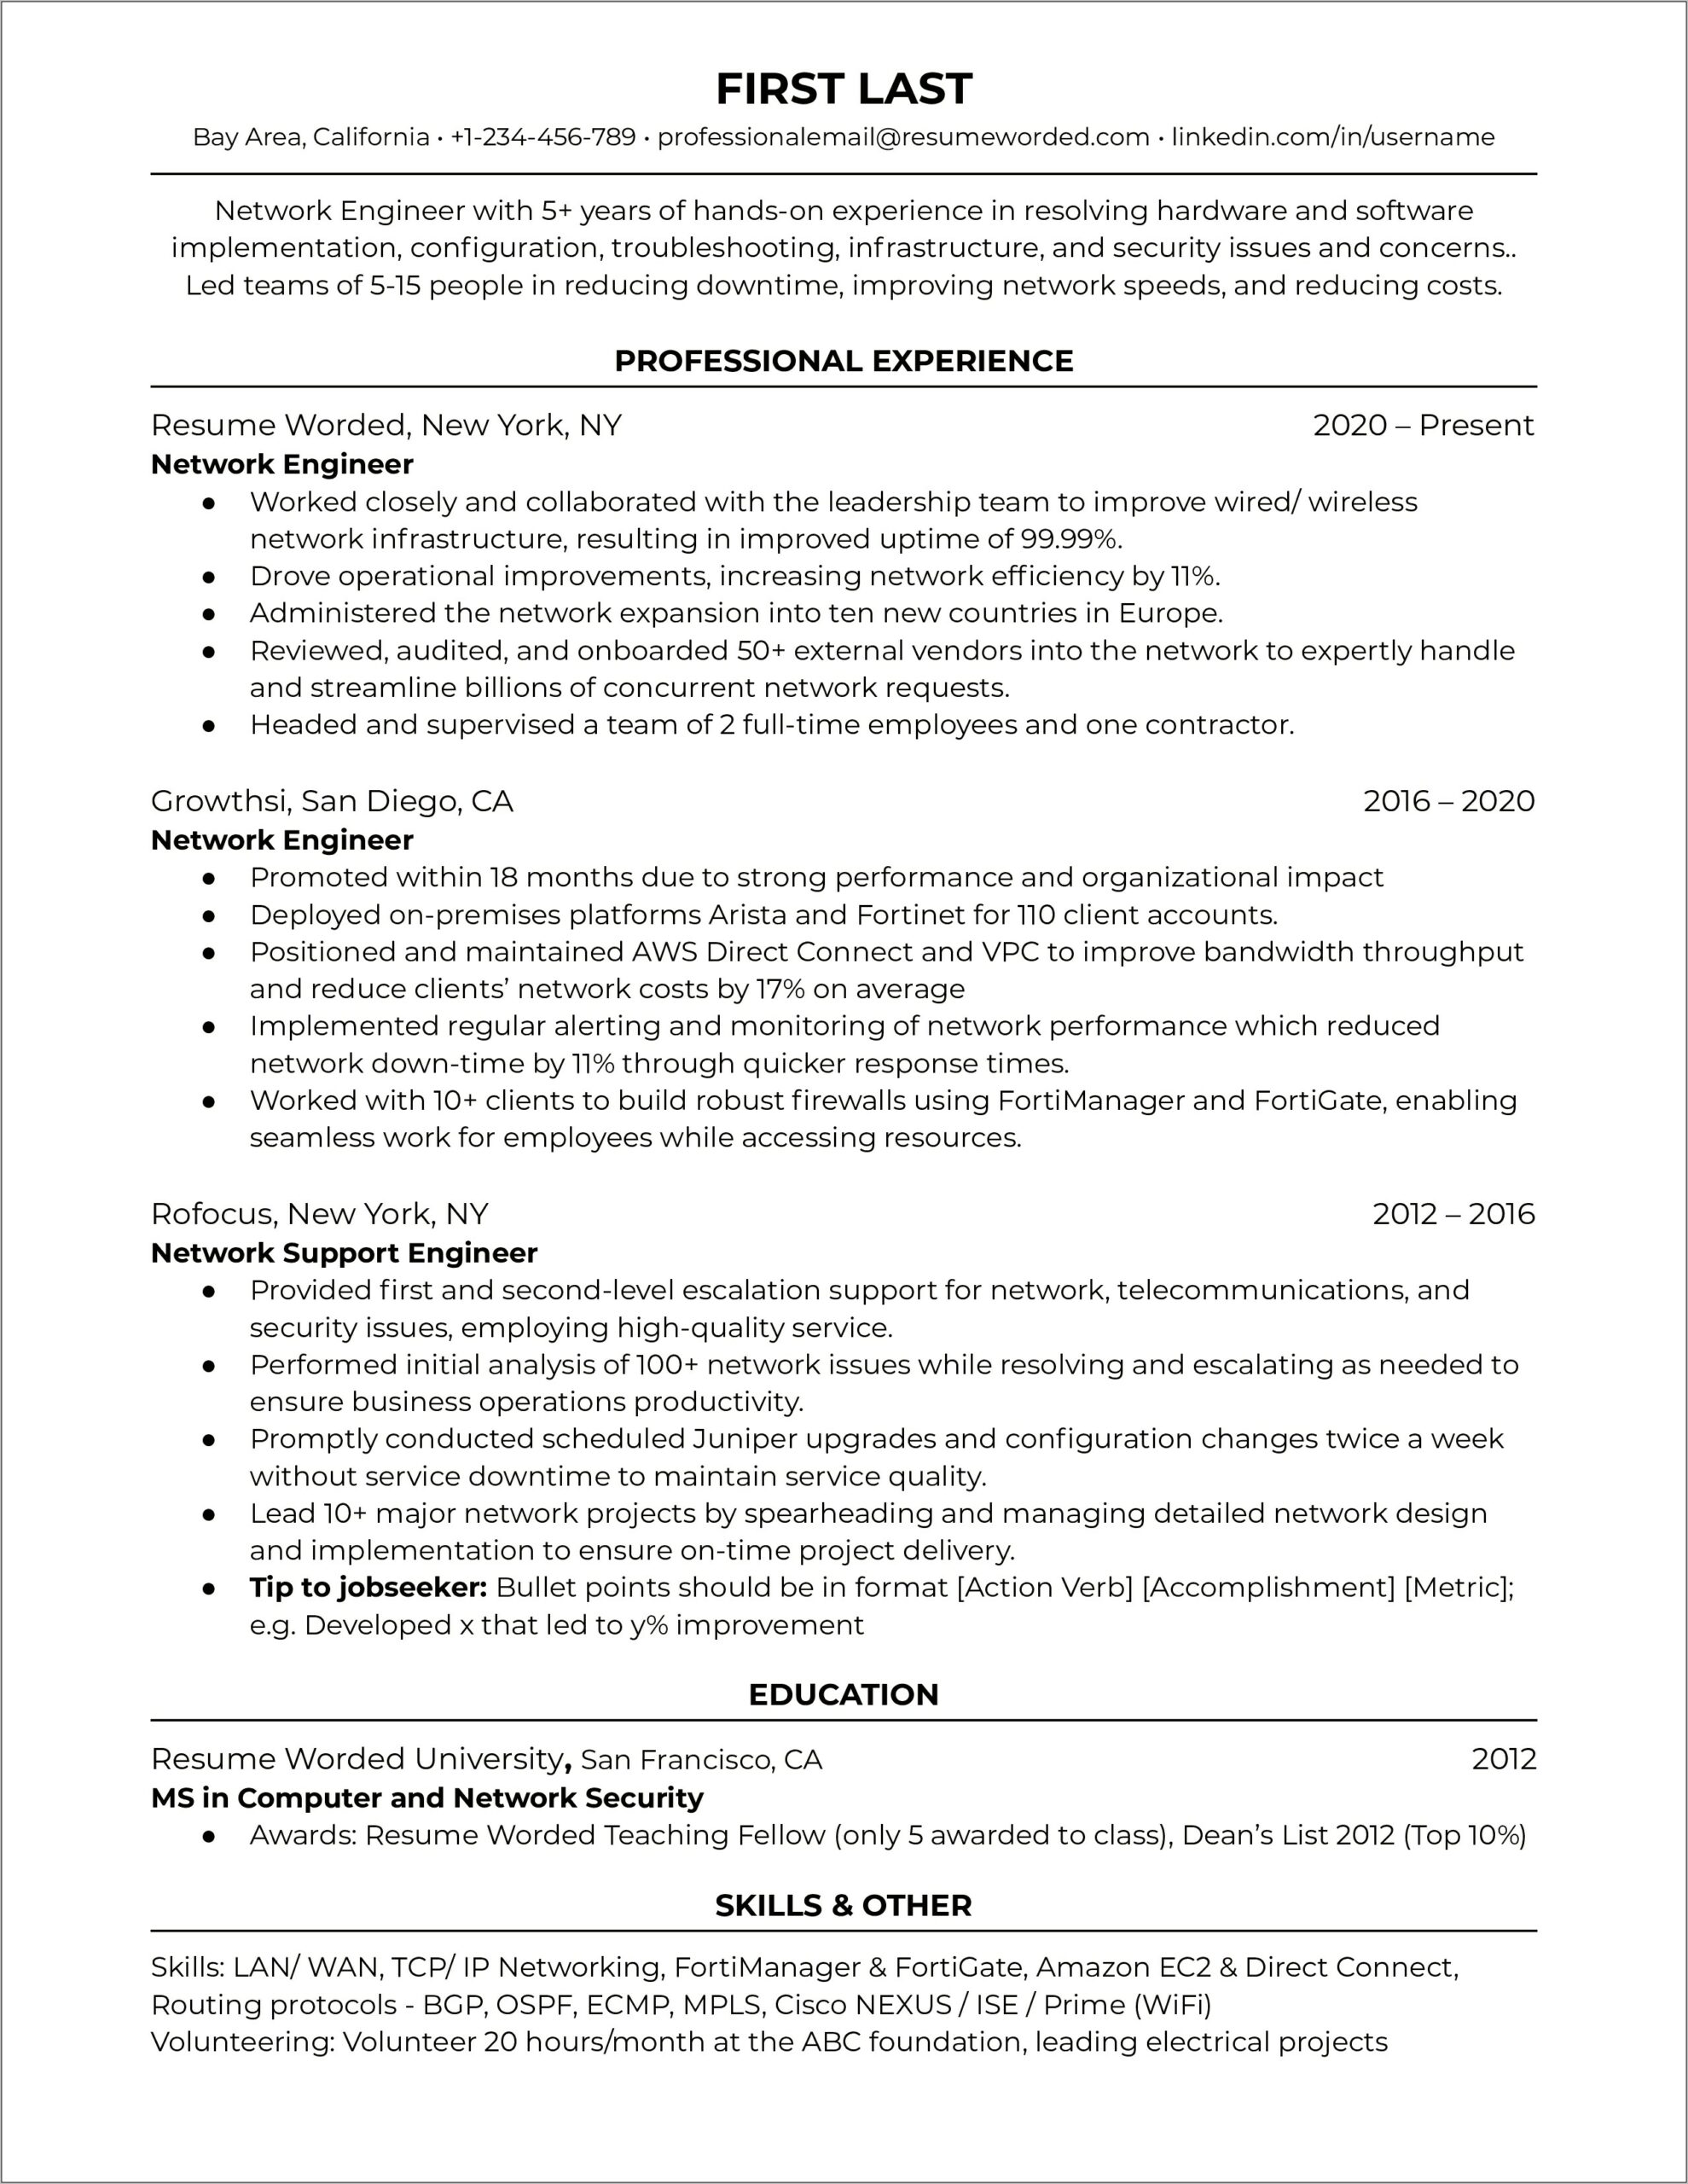 Computer Skills Resume For Networking